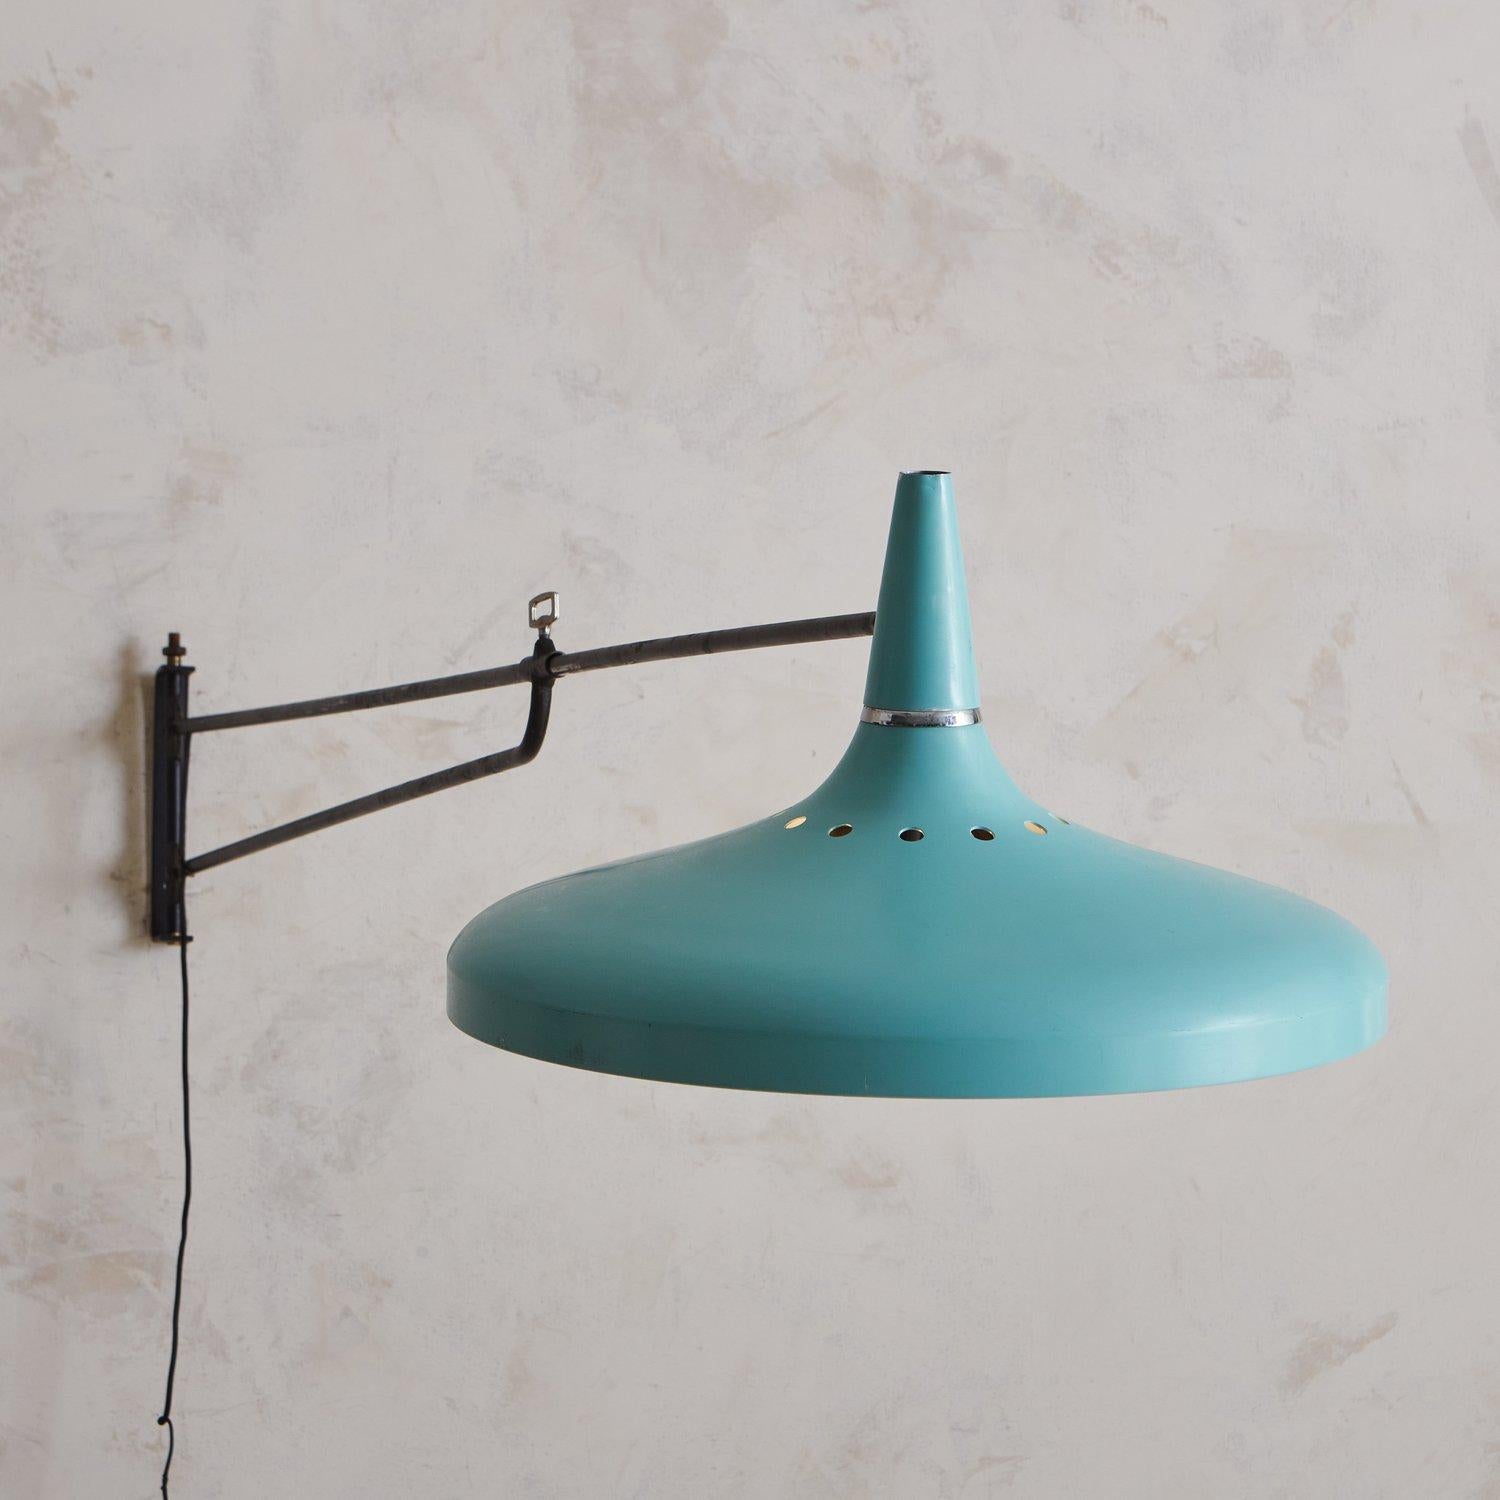 A vintage French wall sconce featuring a circular blue metal shade with circular cutout details. This sconce has an oversized pivoting metal arm, which is 72” shortest and extends to 75” outwards from the wall. Unsigned. Sourced in France, 20th